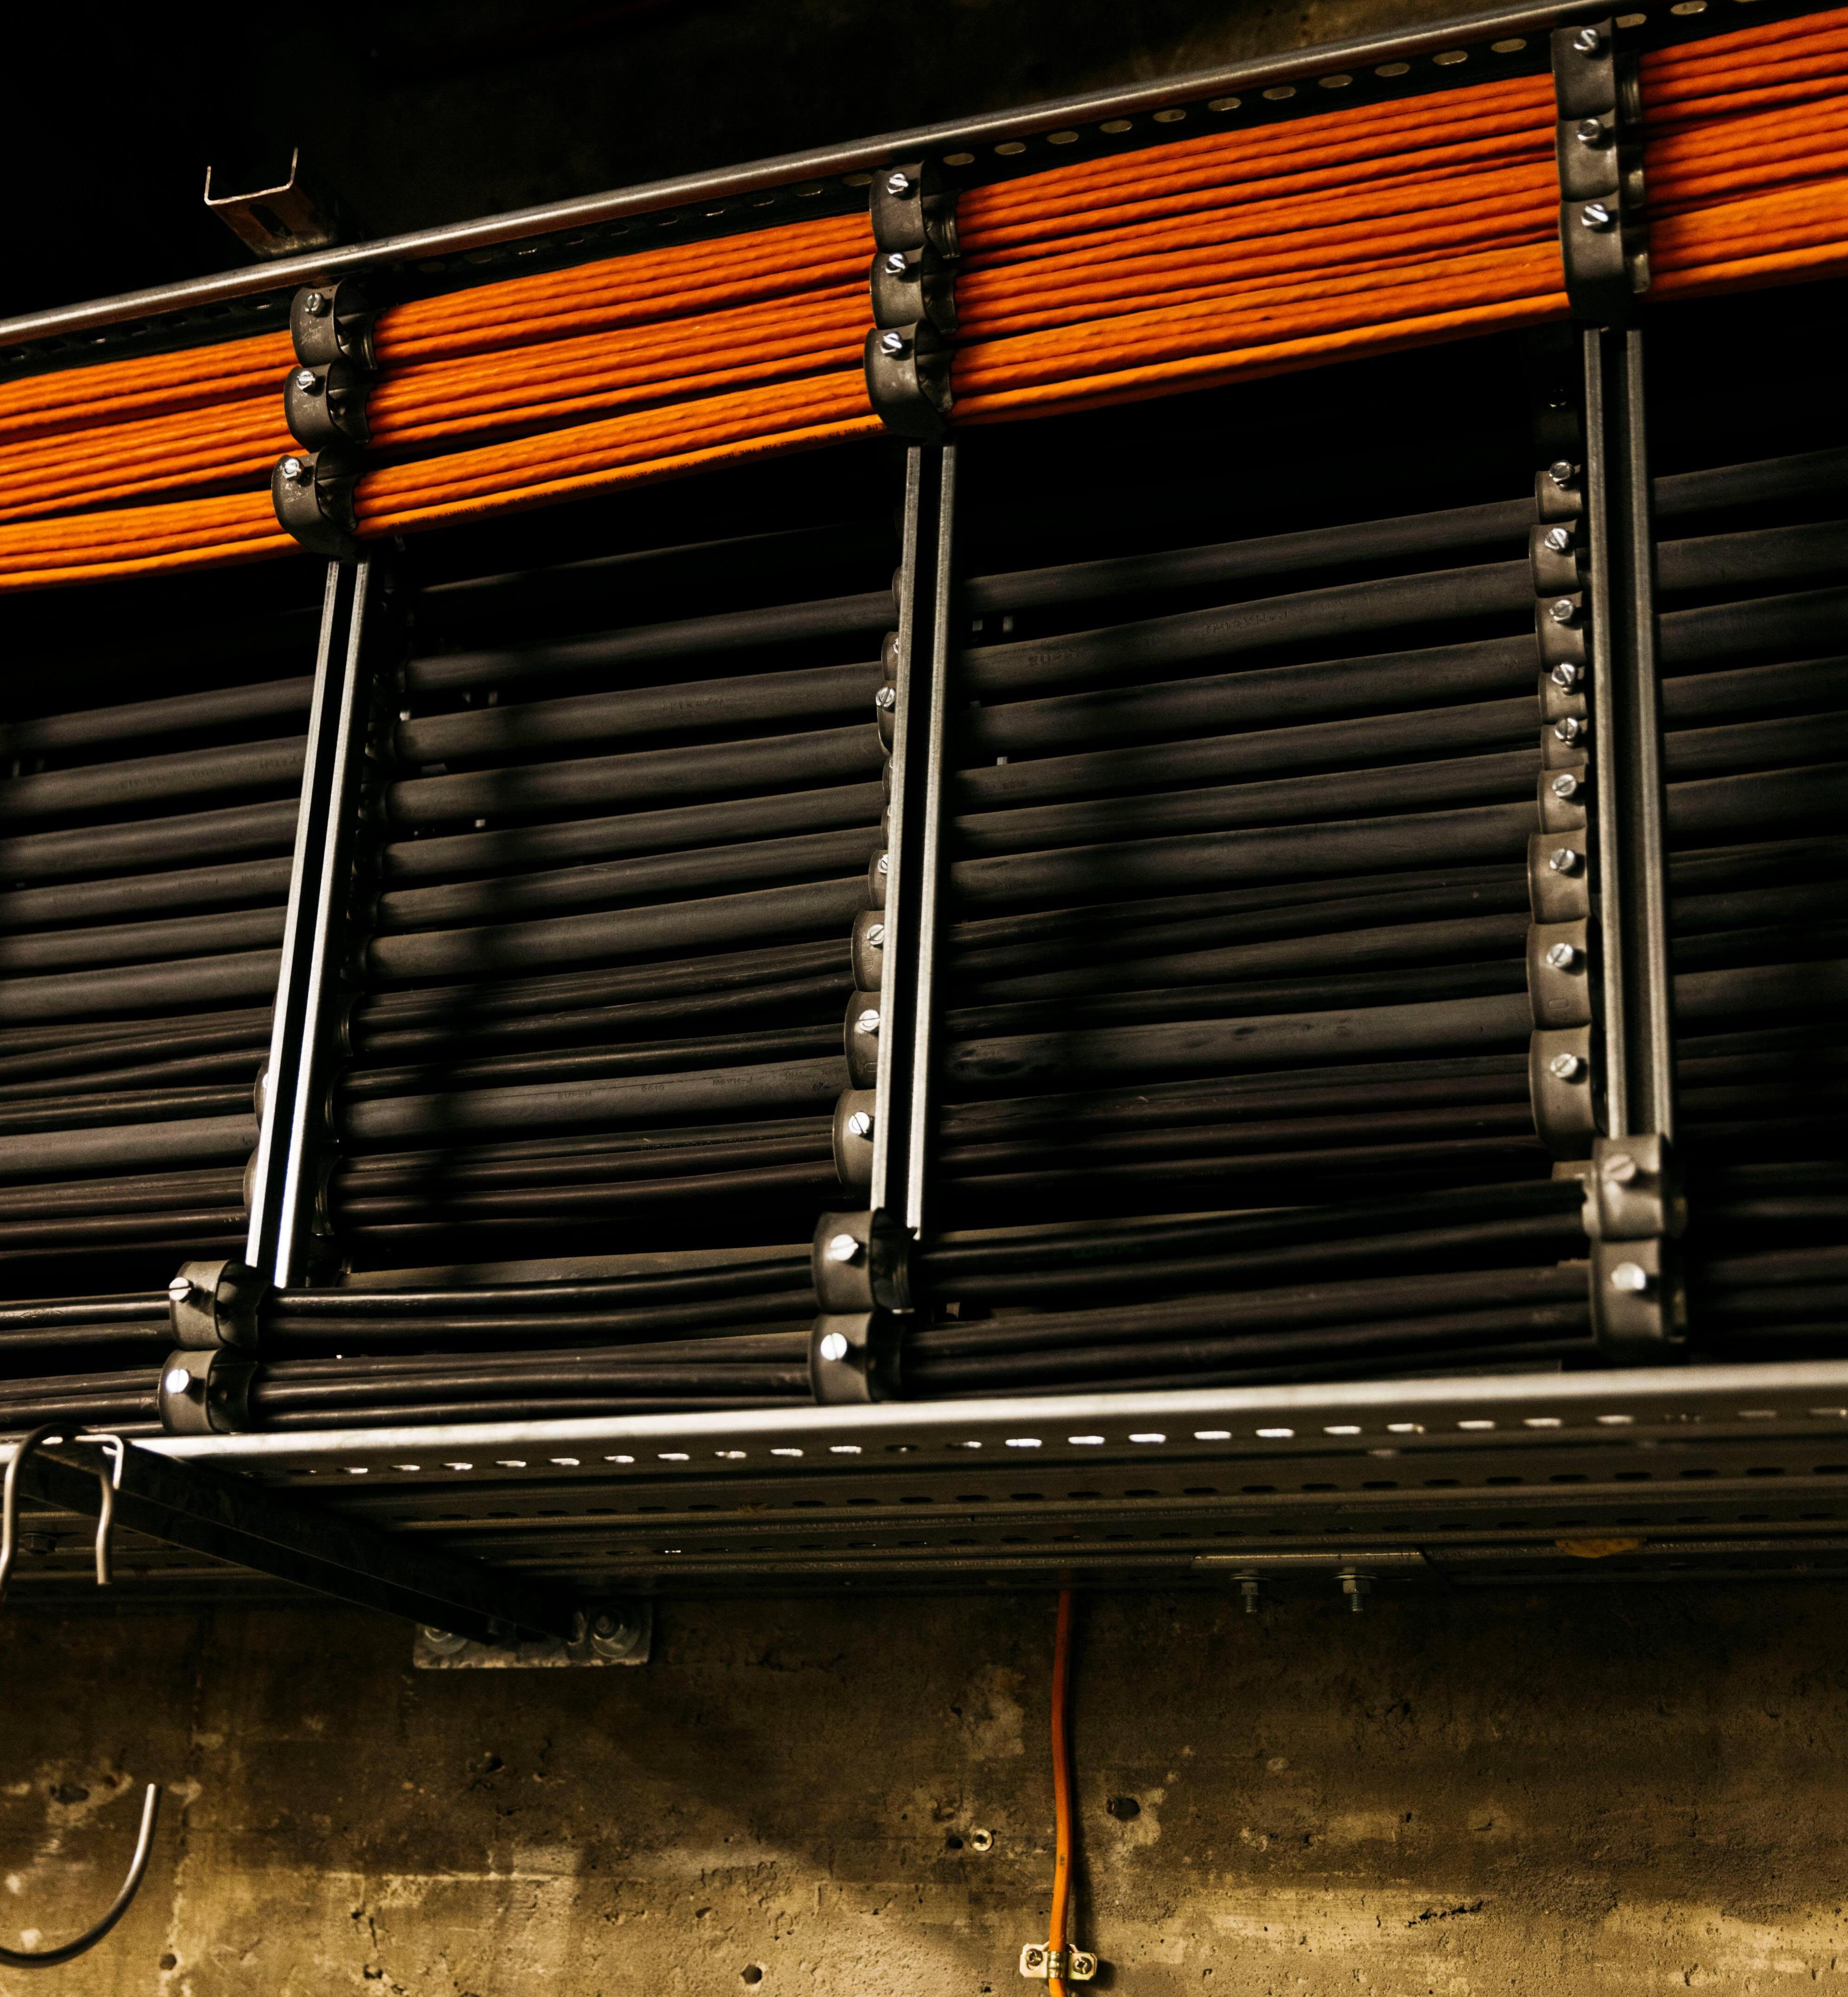 Black and orange cables run along a wall.